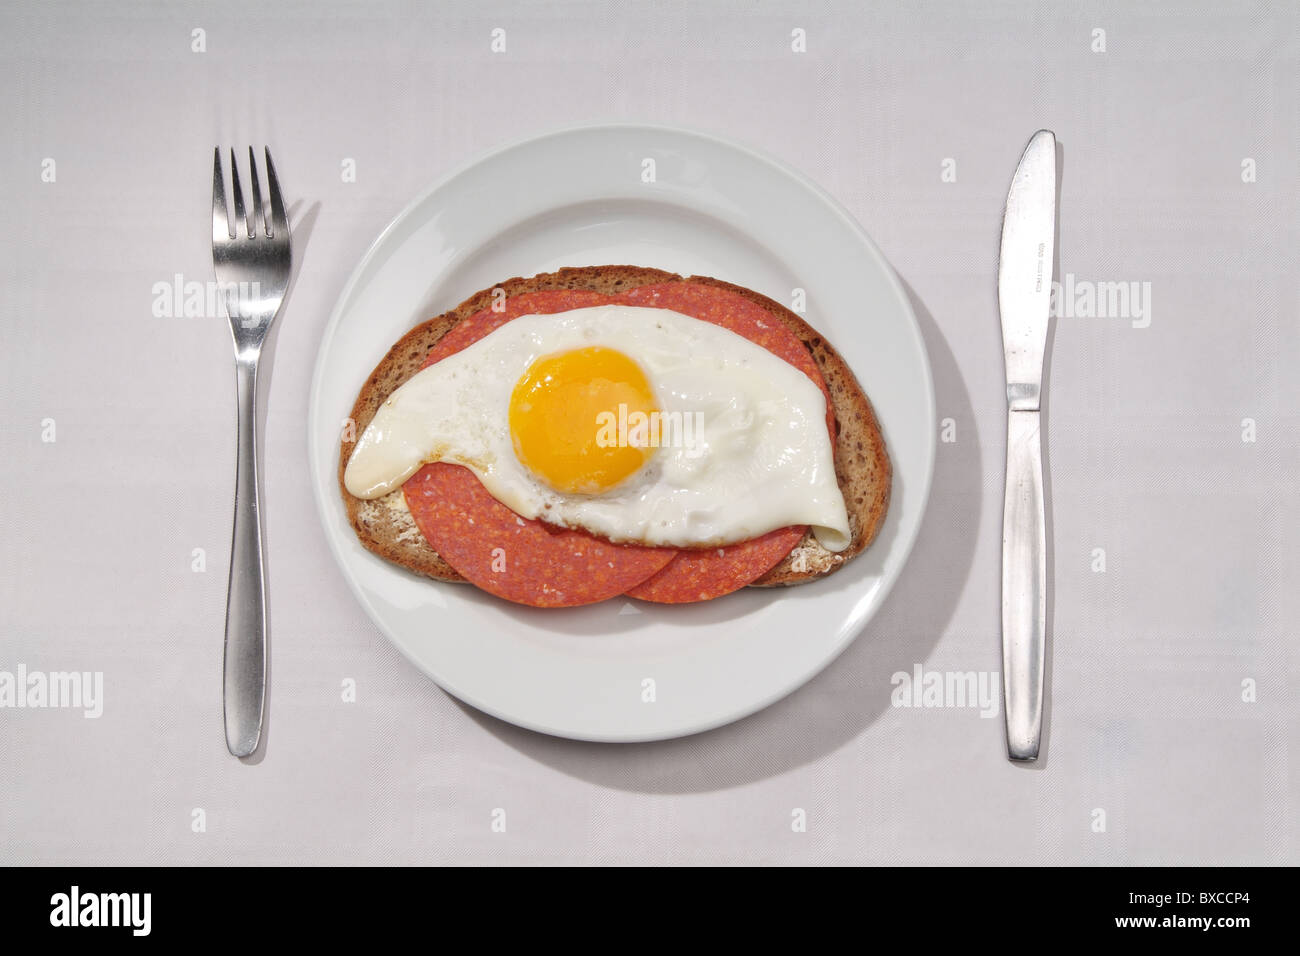 A slice of bread topped with salami and fried egg Stock Photo